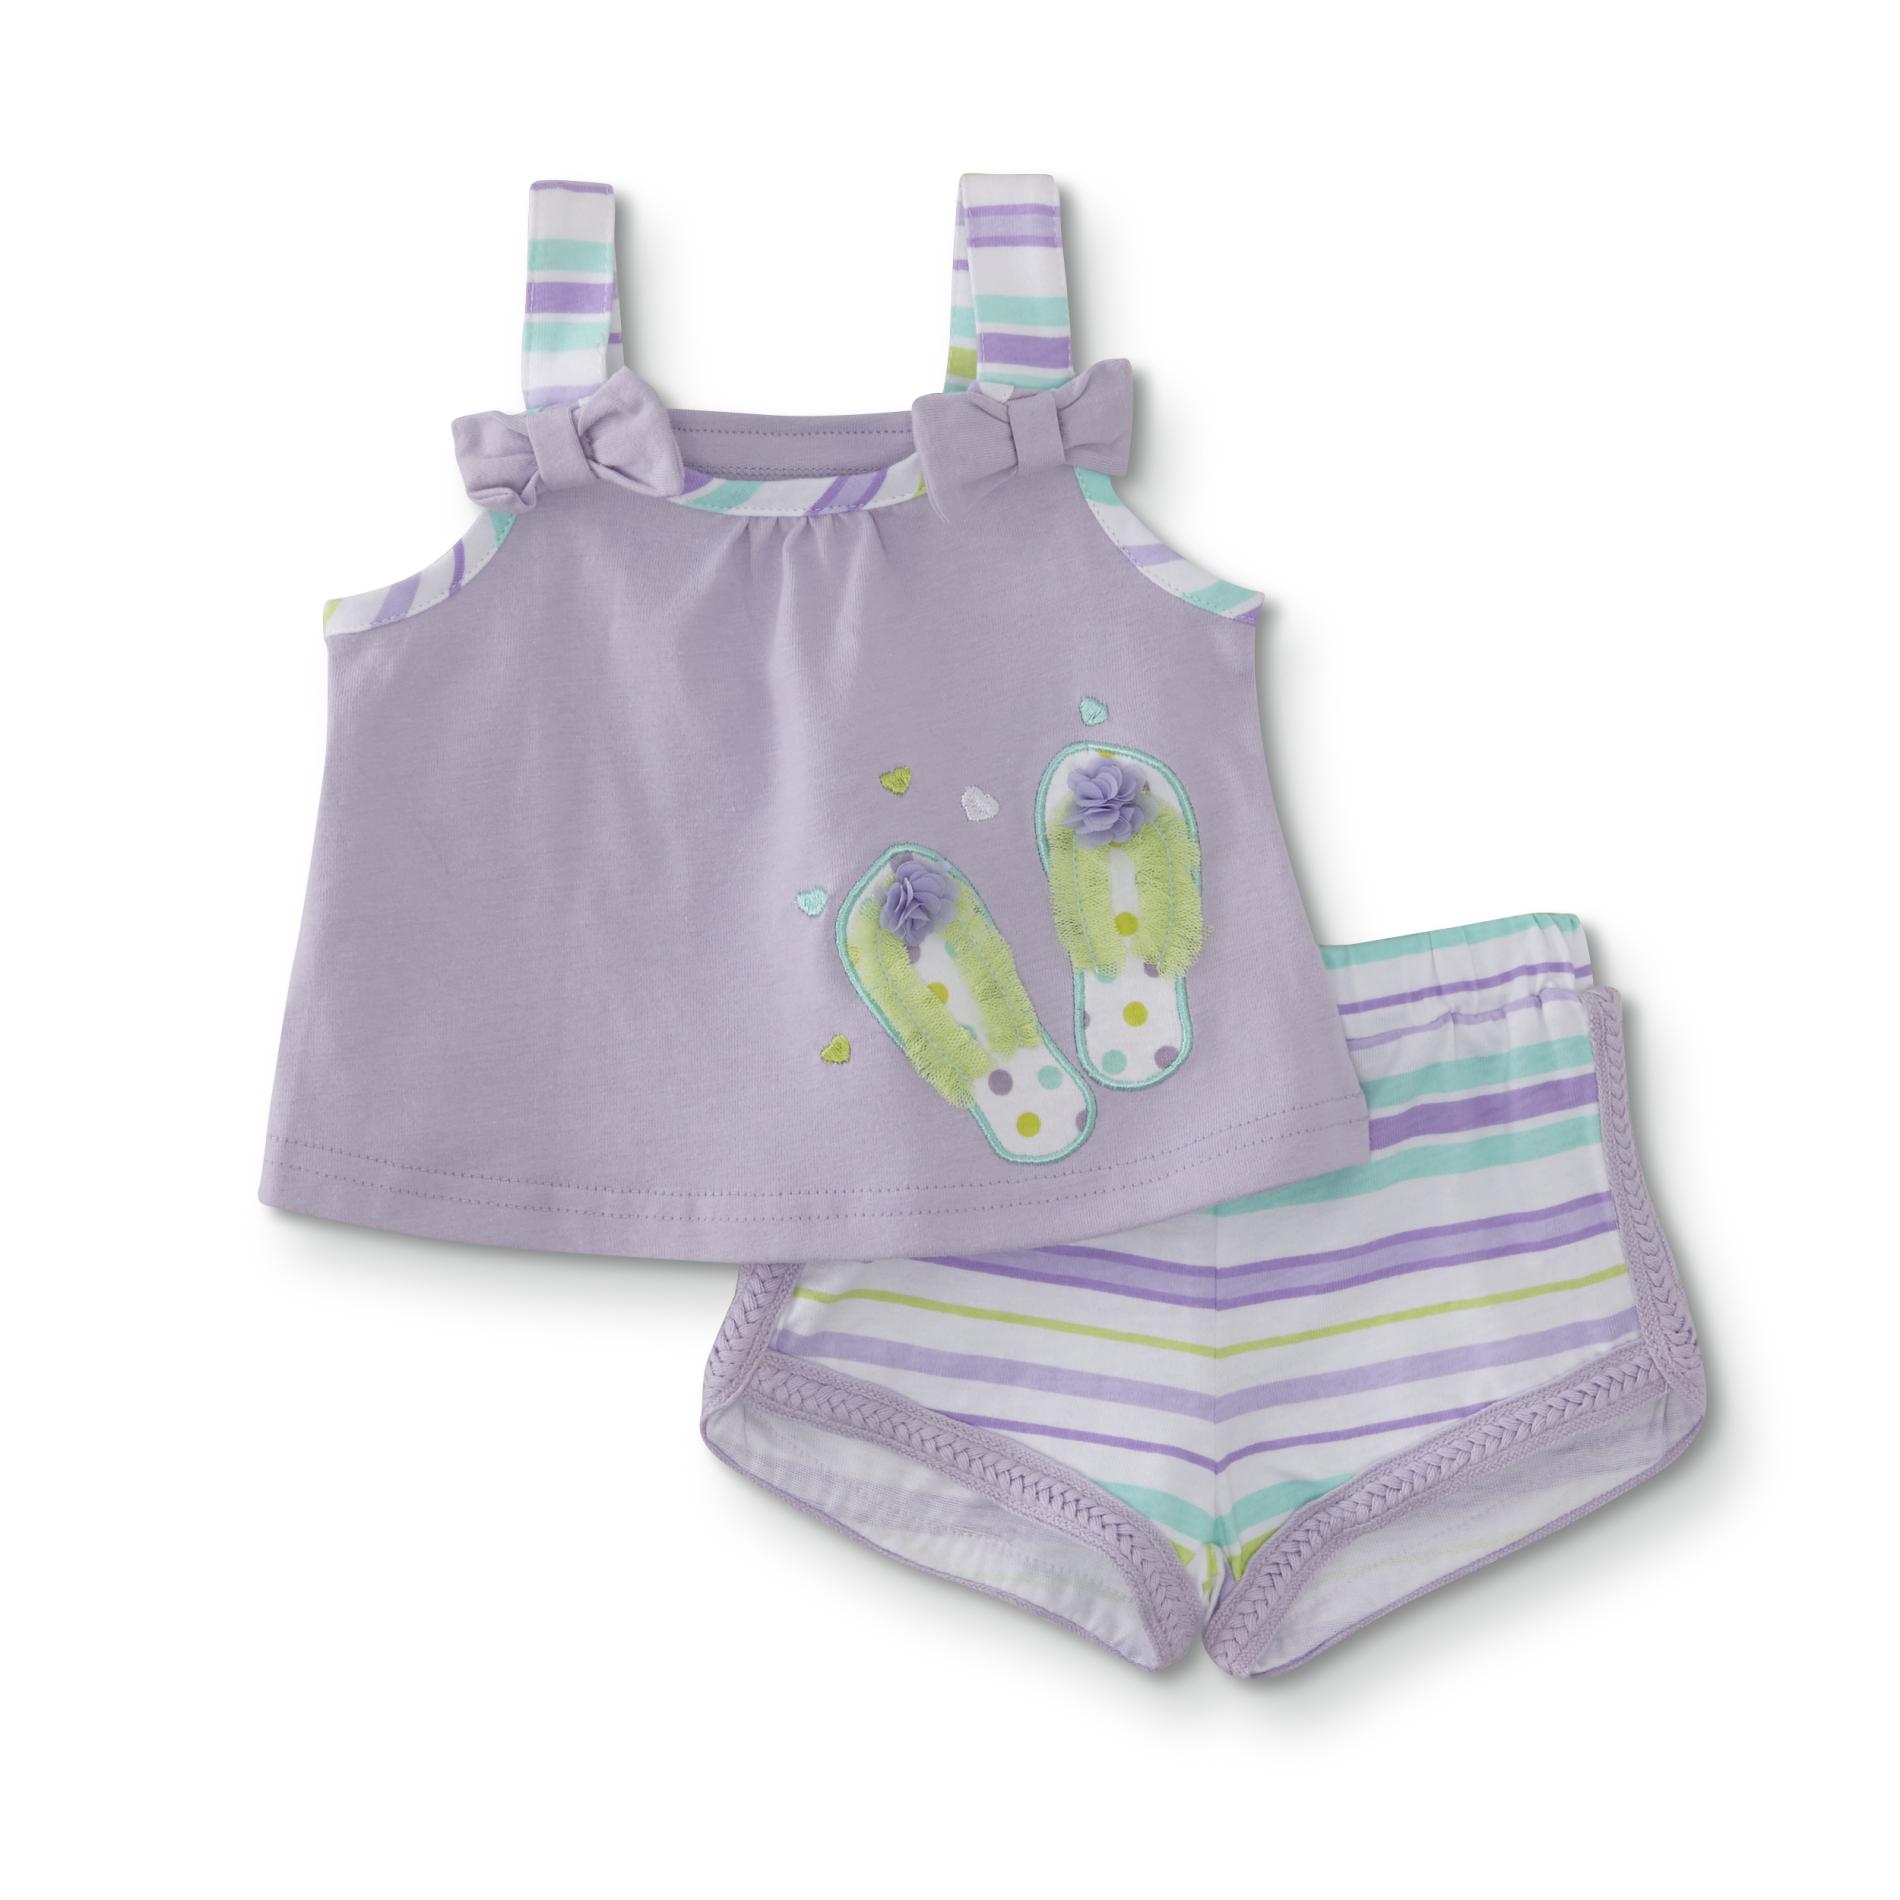 Baby Essentials Infant Girls' Tank Top & Shorts - Sandal/Striped